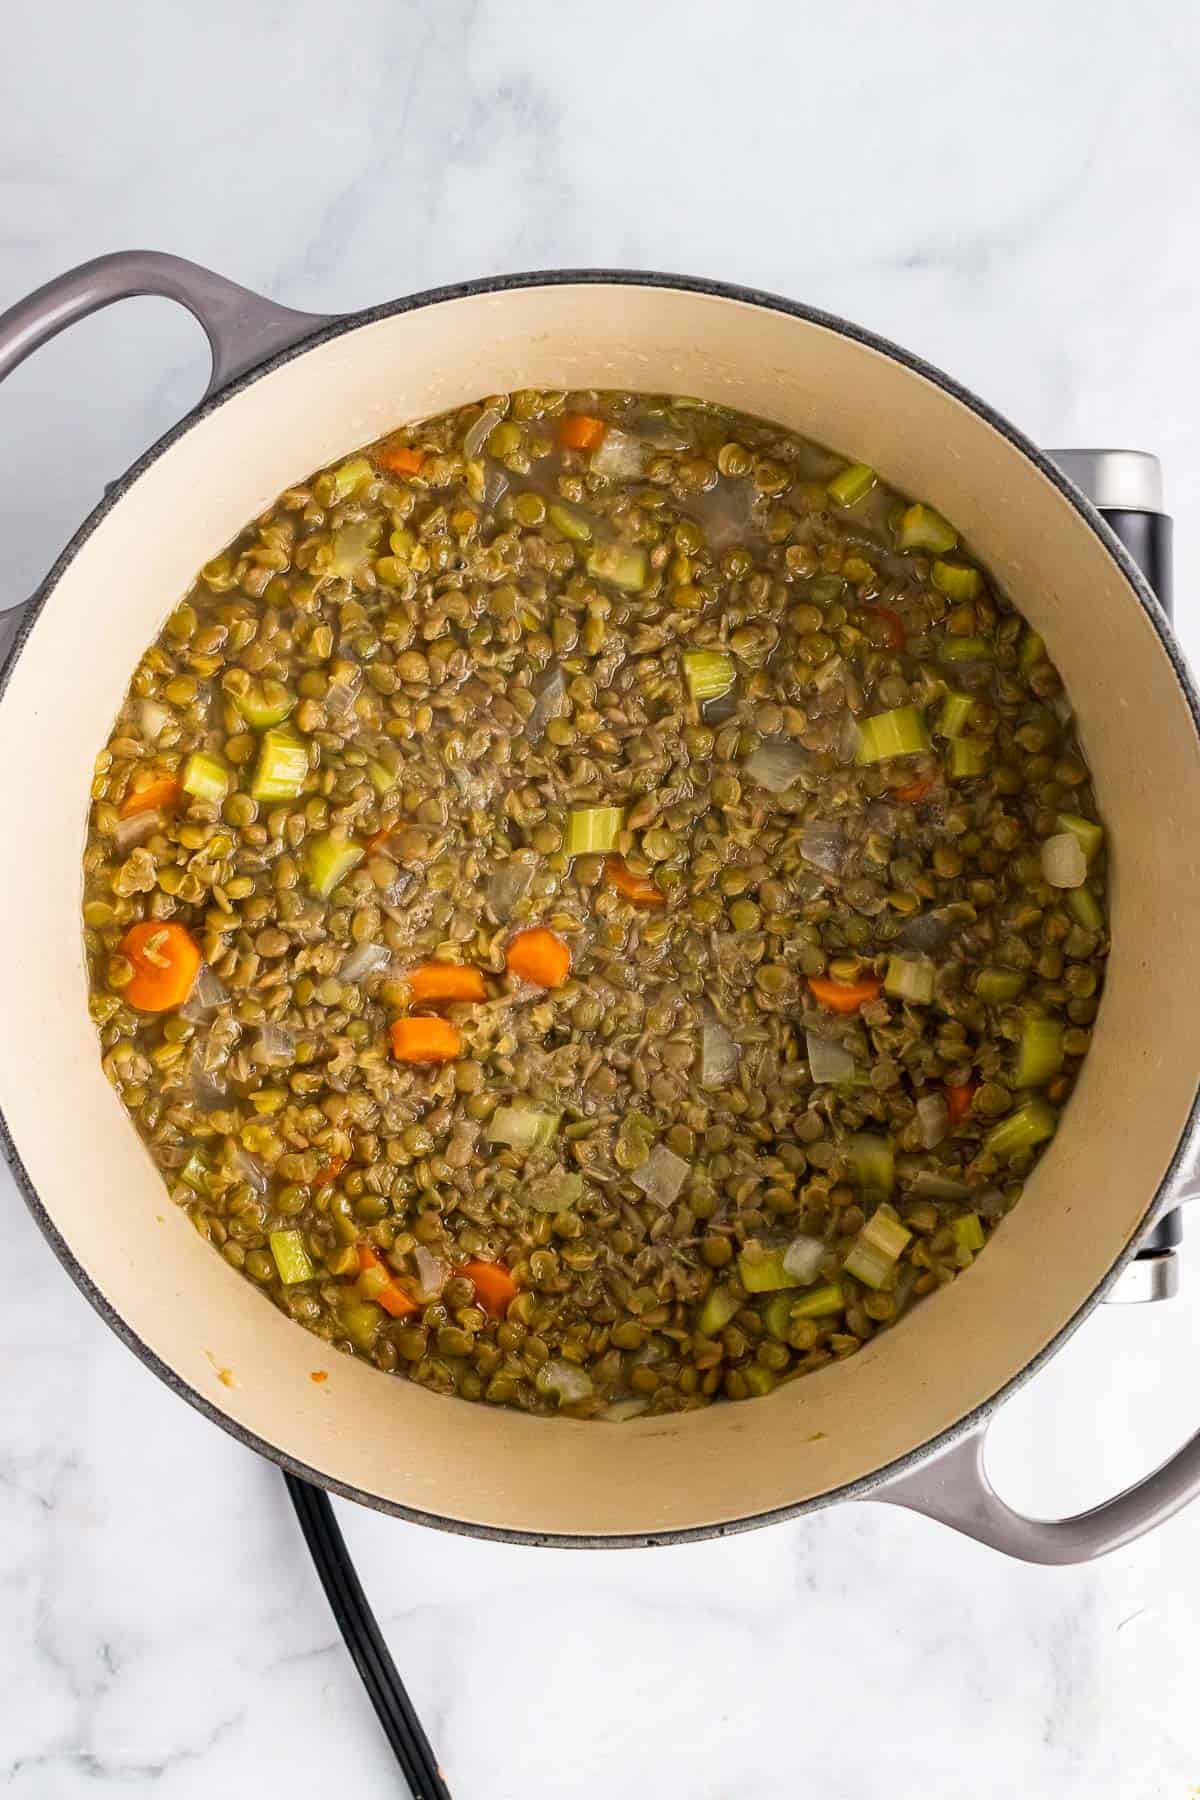 Turkey stock, lentils, onions, celery, and carrots simmering in a pot